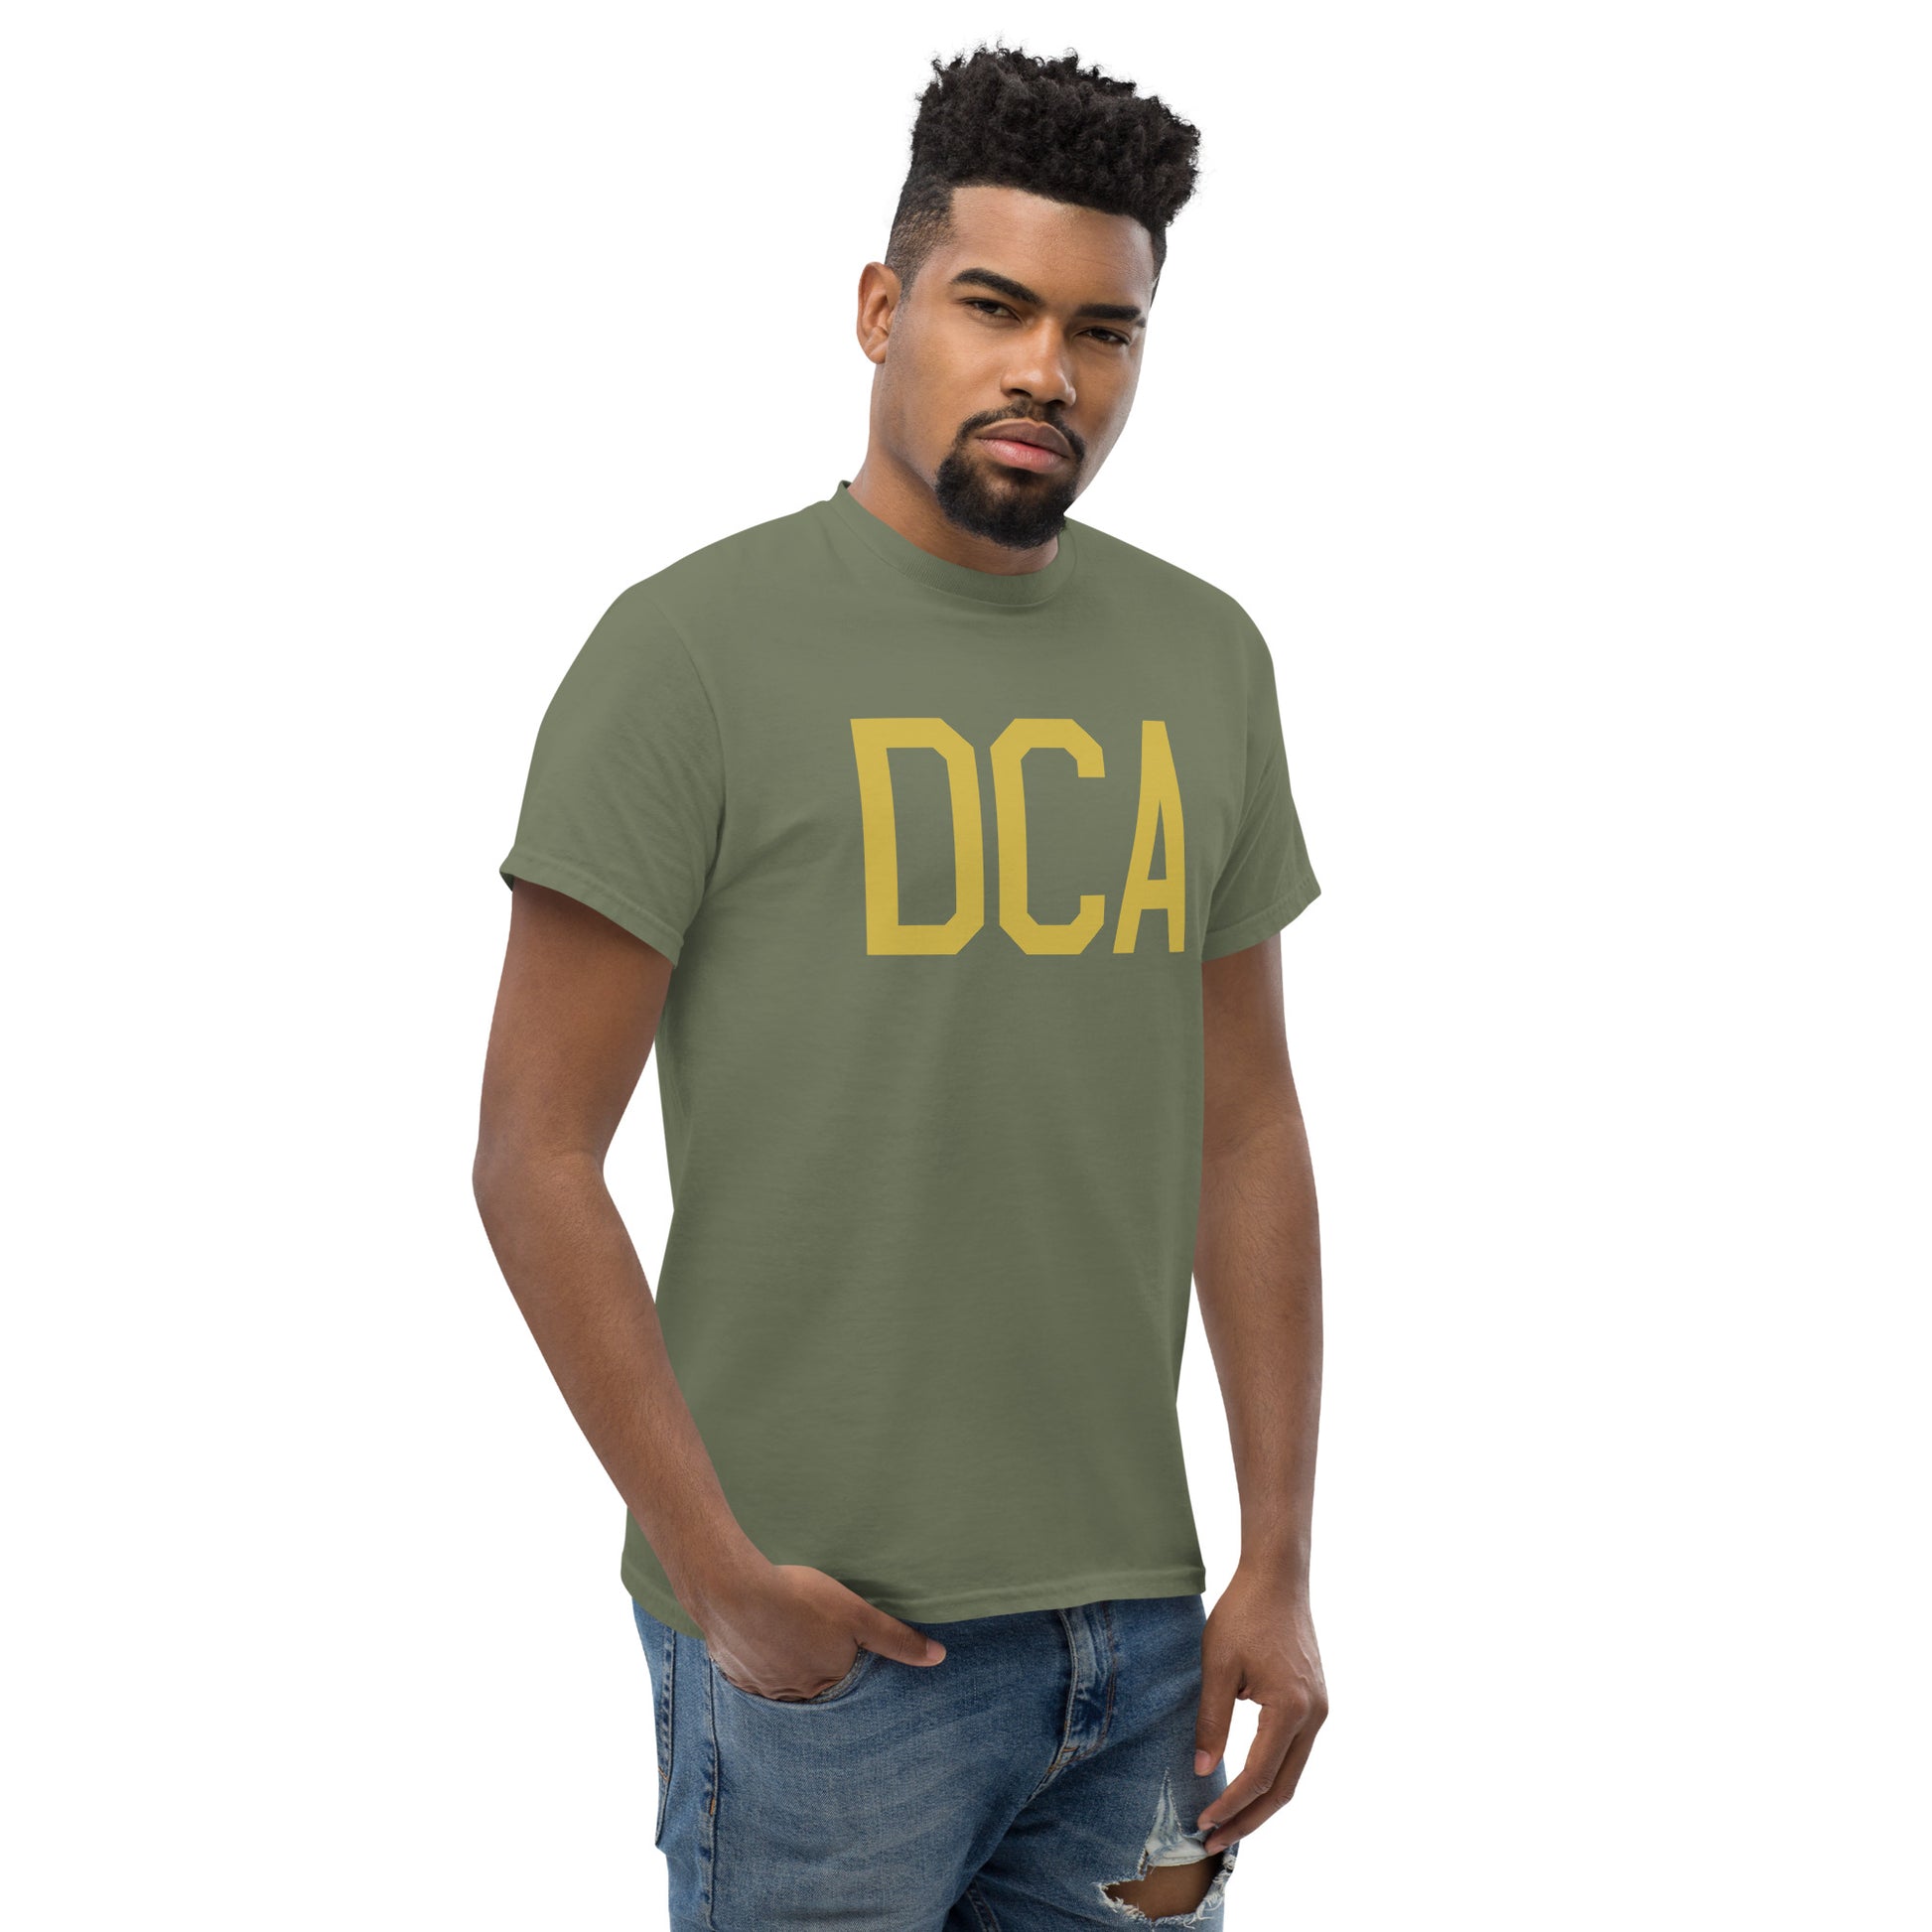 Aviation Enthusiast Men's Tee - Old Gold Graphic • DCA Washington • YHM Designs - Image 08